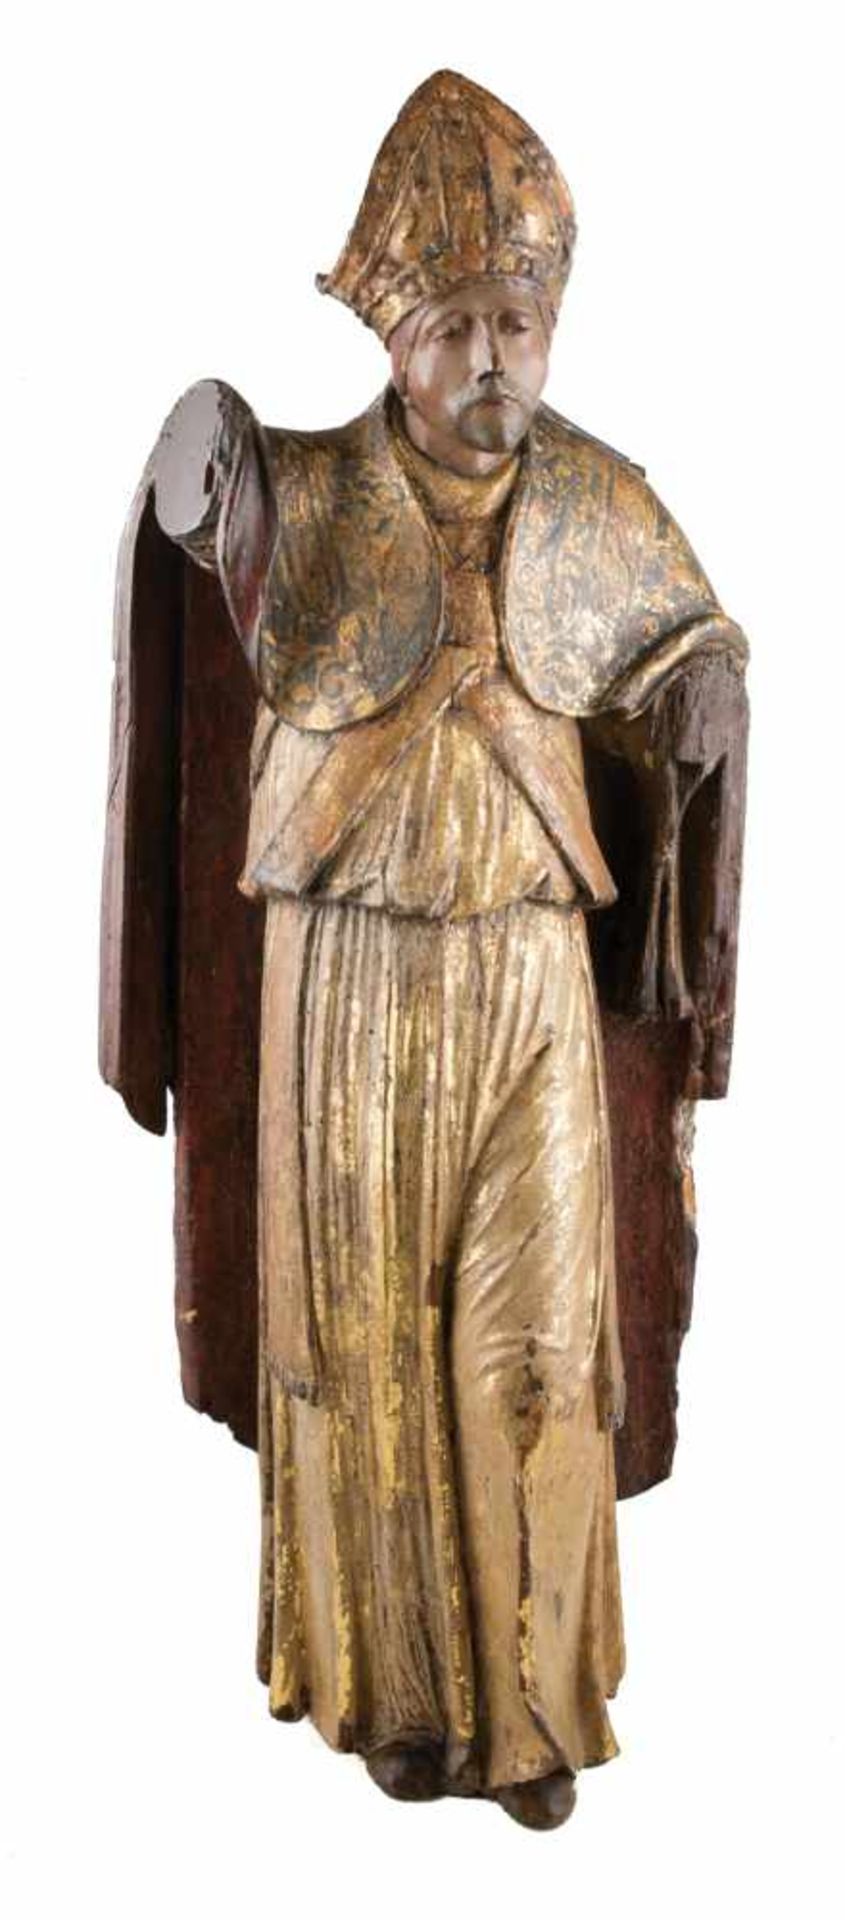 "Bishop". Carved, gilded and polychromed wooden sculpture. Castilian School. Late 15th / early